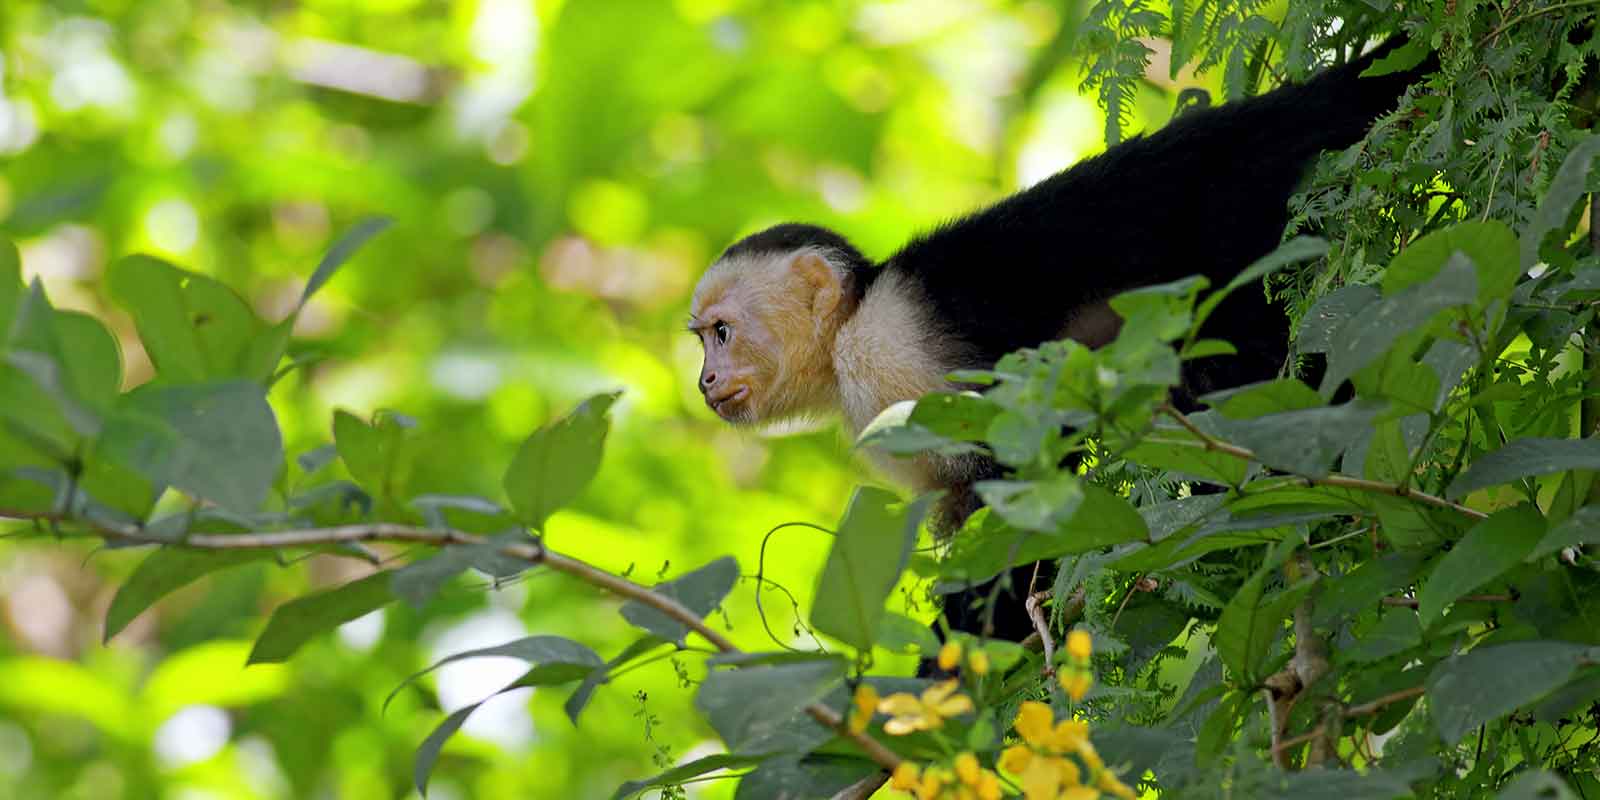 White faced capuchin monkey looking out from tree in Manuel Antonio